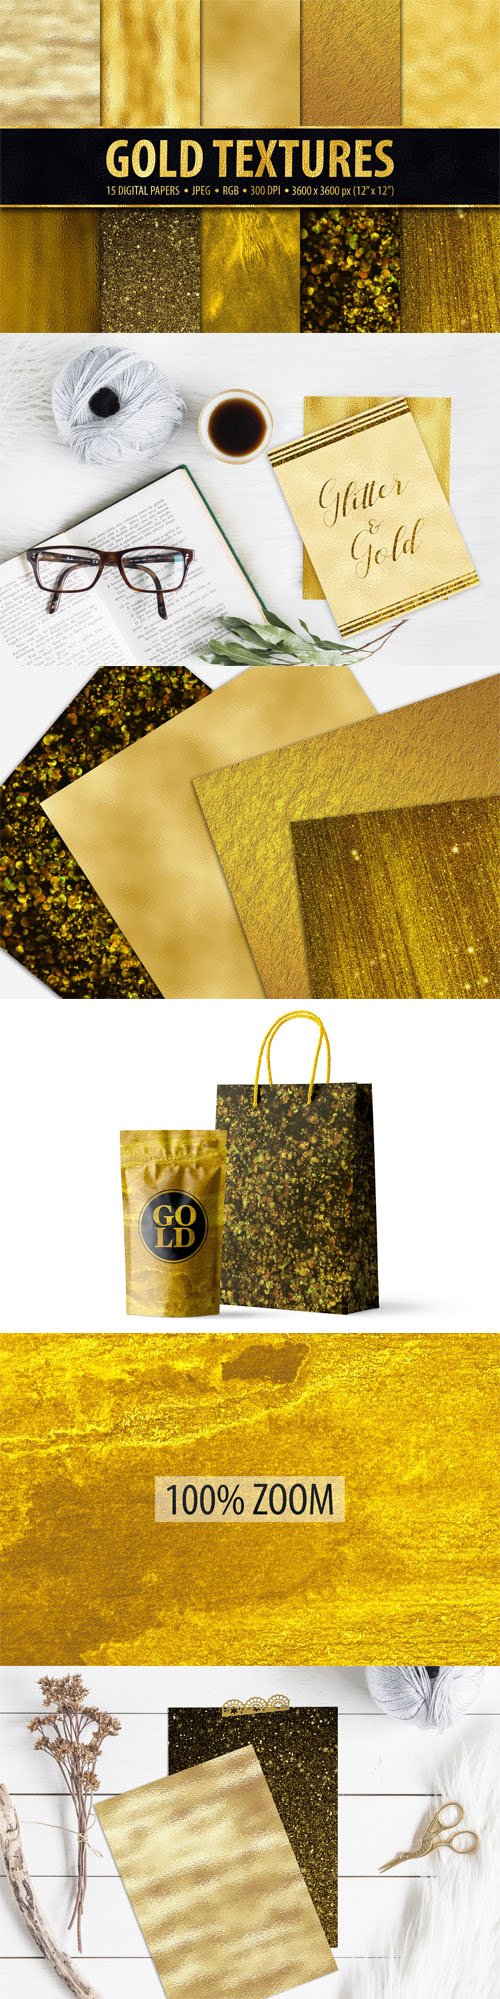 15 Gold and Glitter Textures Pack